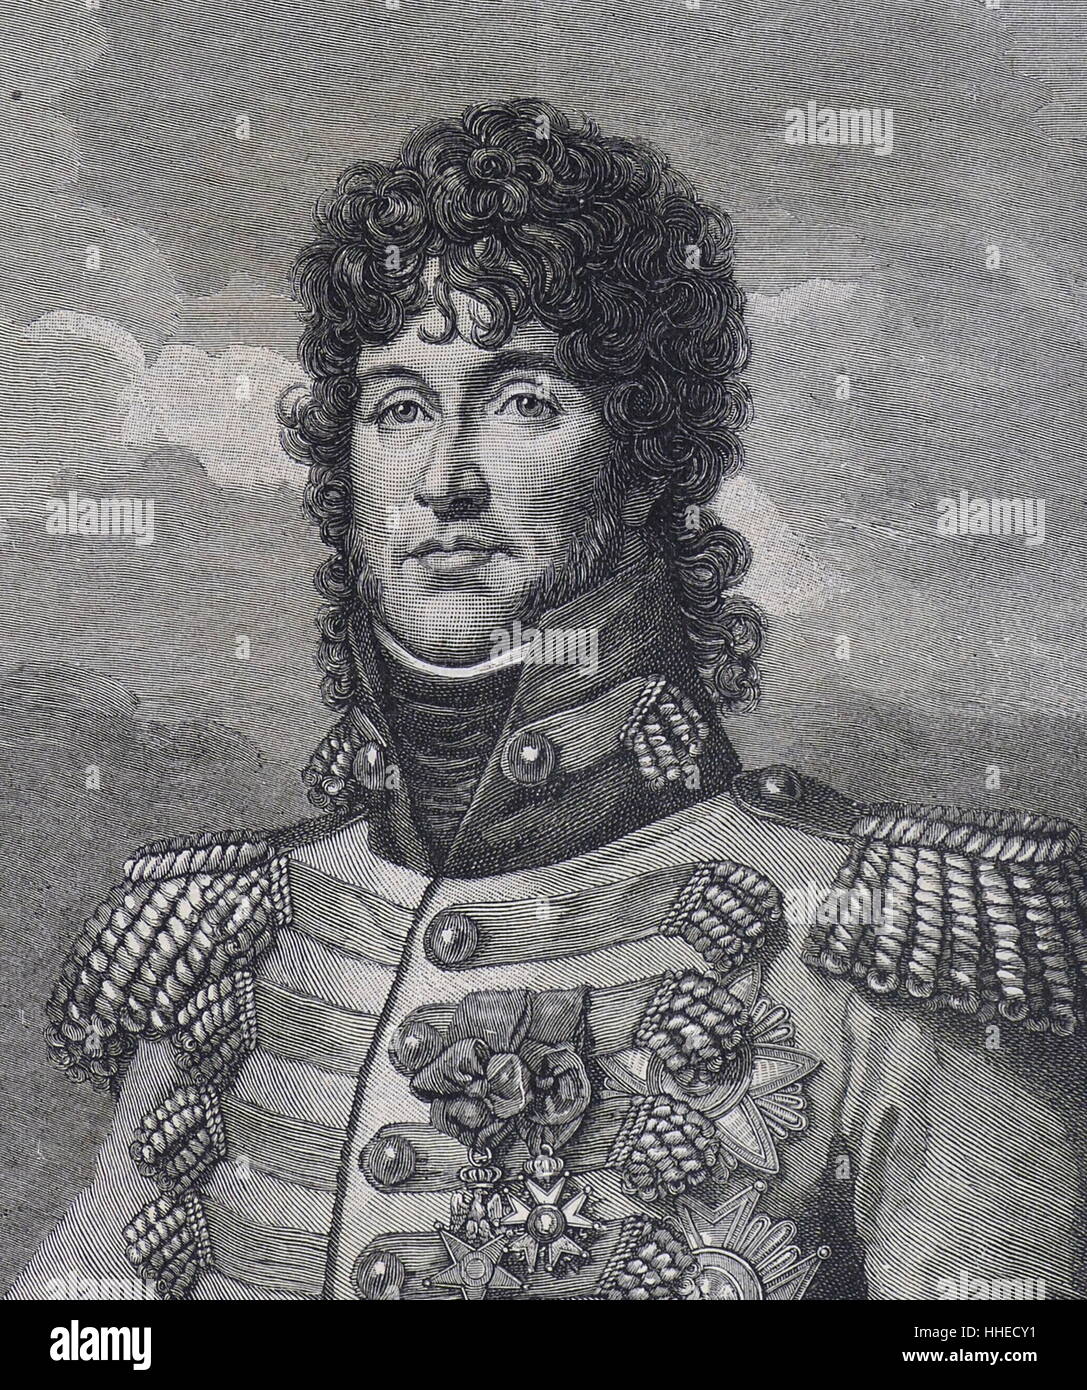 Joachim Murat (1767-1815). French soldier king of Naples 1808; married Napoleon's sister Caroline; contributed to victories at Marengo, Austerlitz, Jena and Eylau; after Napoleon’s final defeat, court-martialled and shot Stock Photo